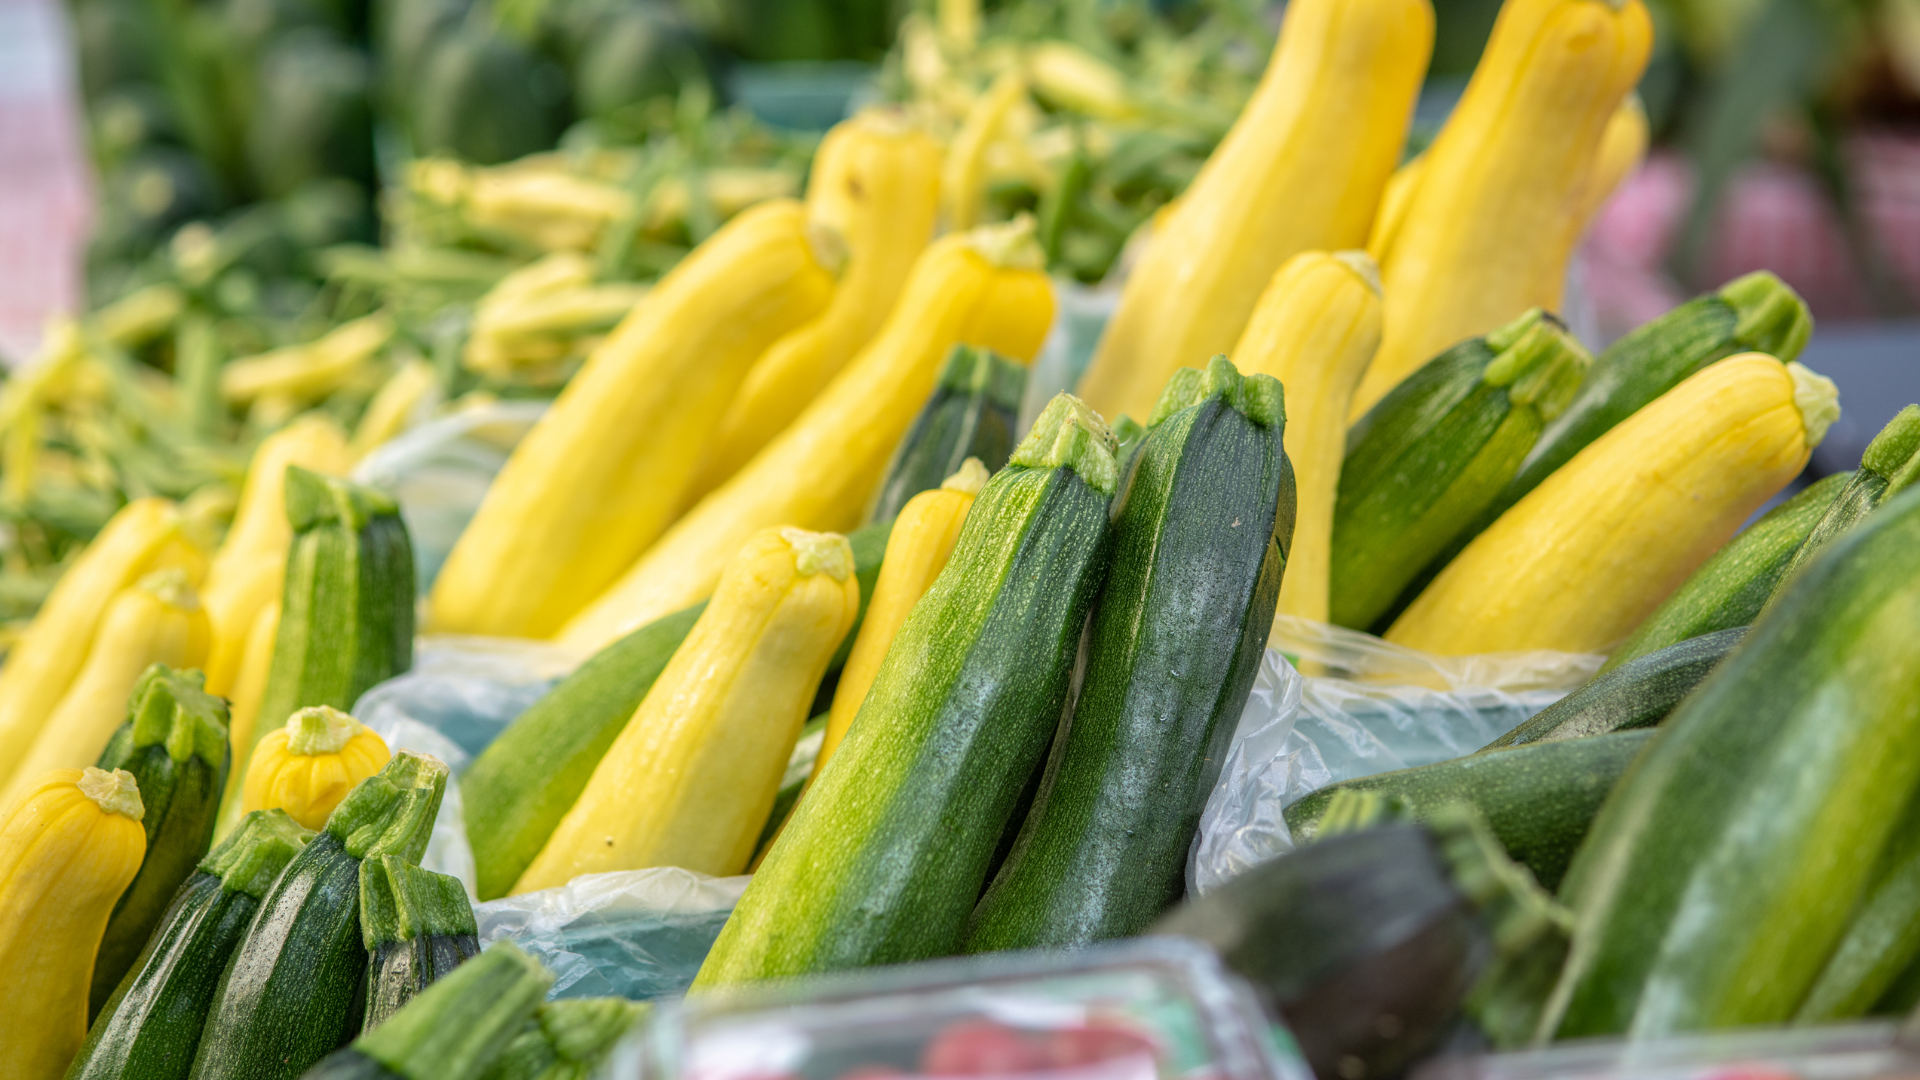 Yellow squash and green zucchini on display at a vendor booth at a Delaware farmers' market